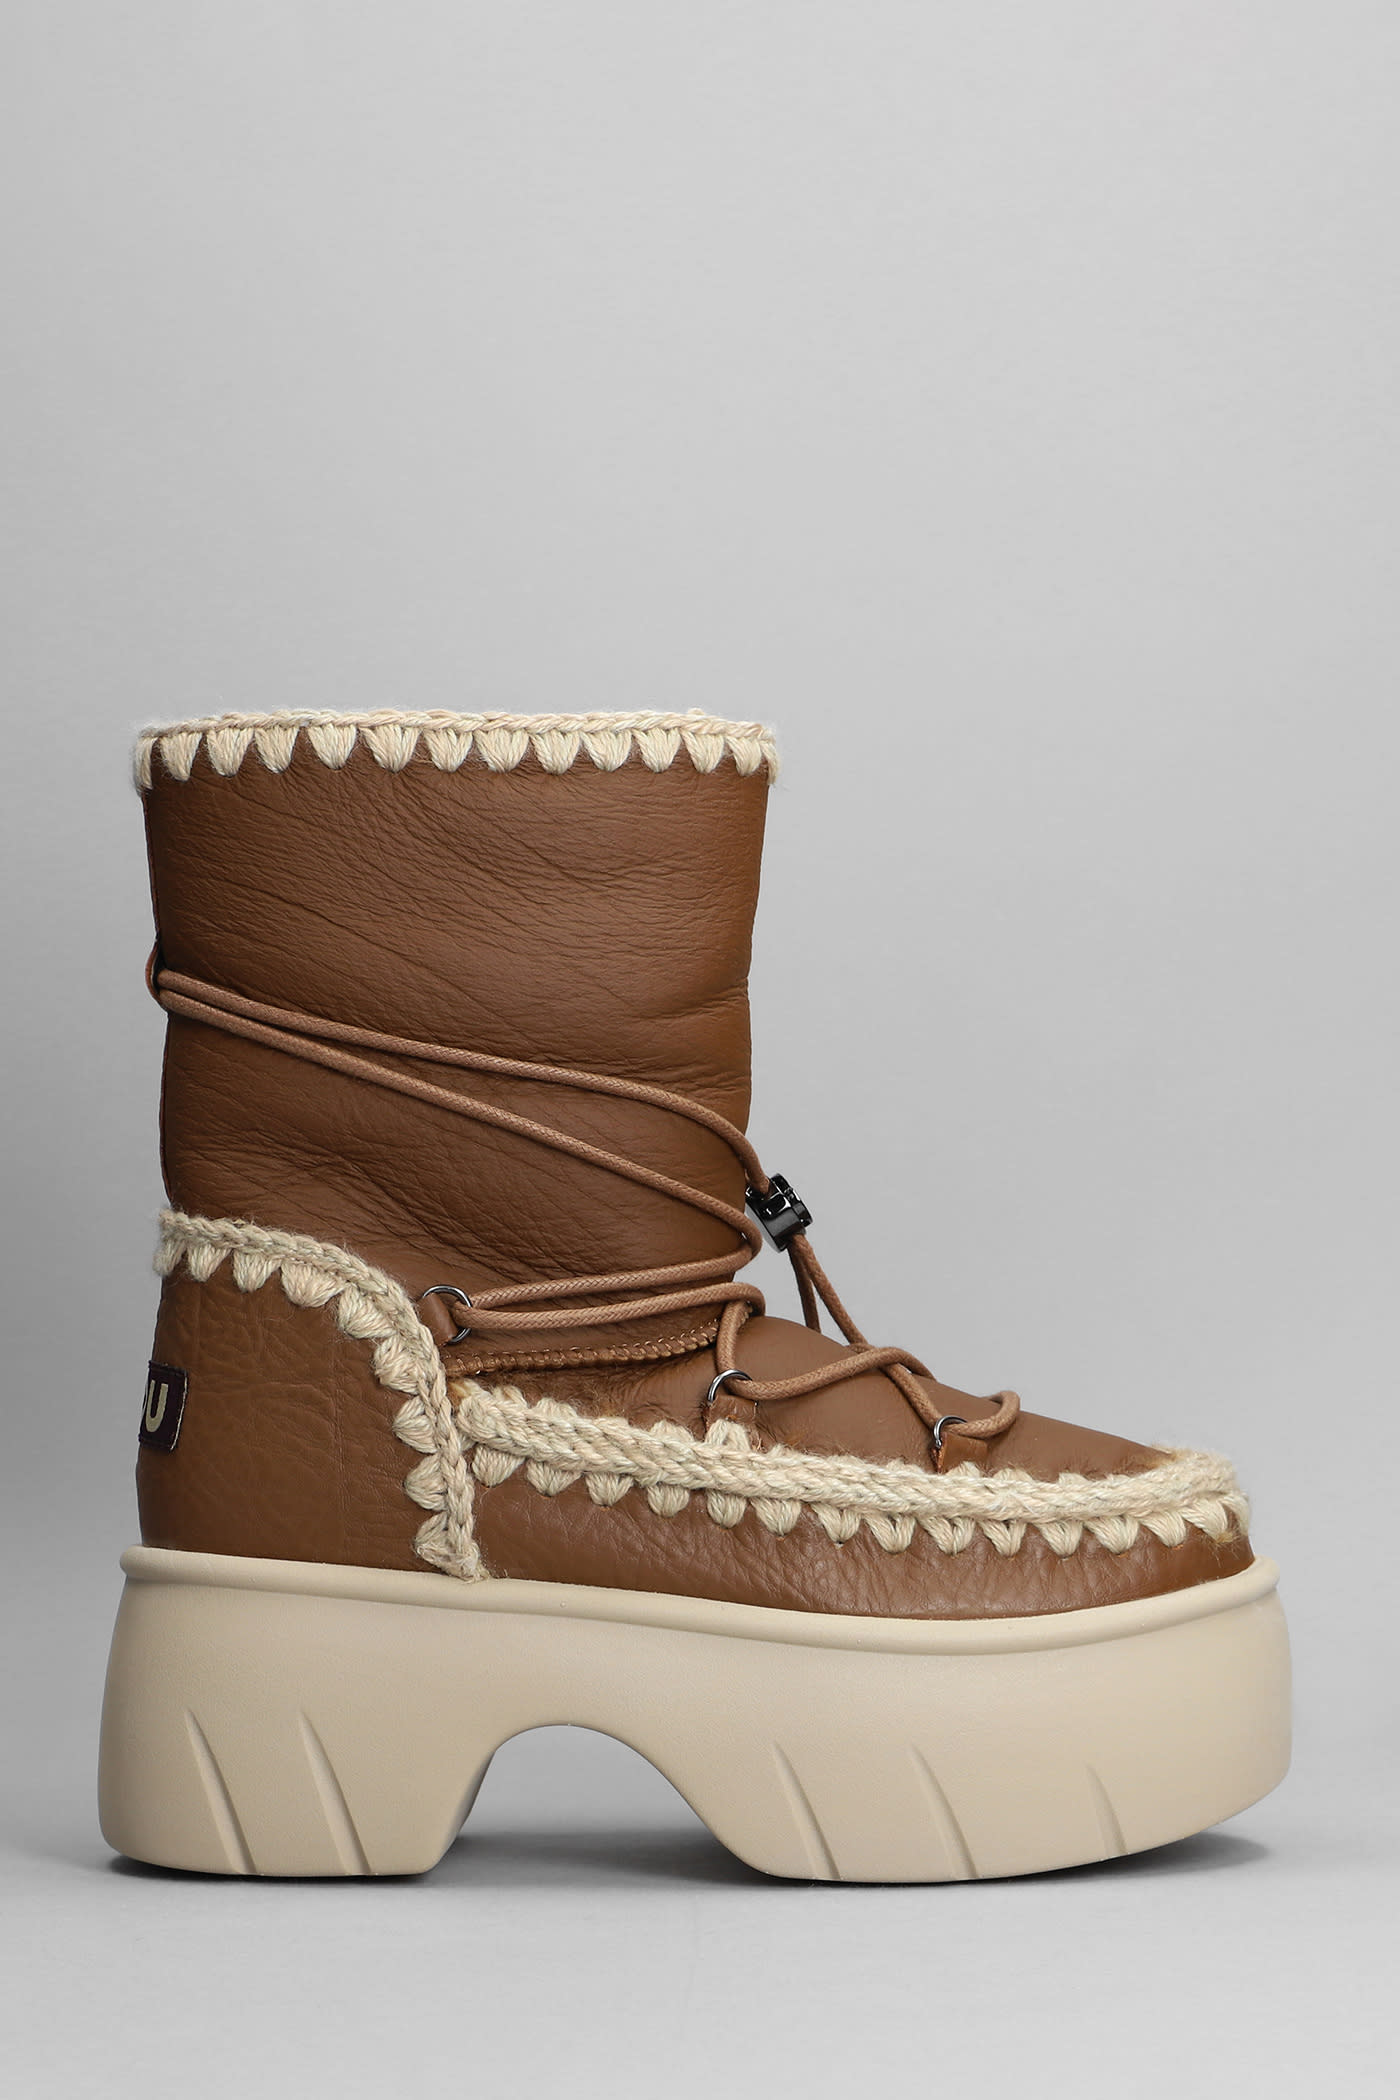 Mou Eskimo Snow High Heels Ankle Boots In Camel Suede